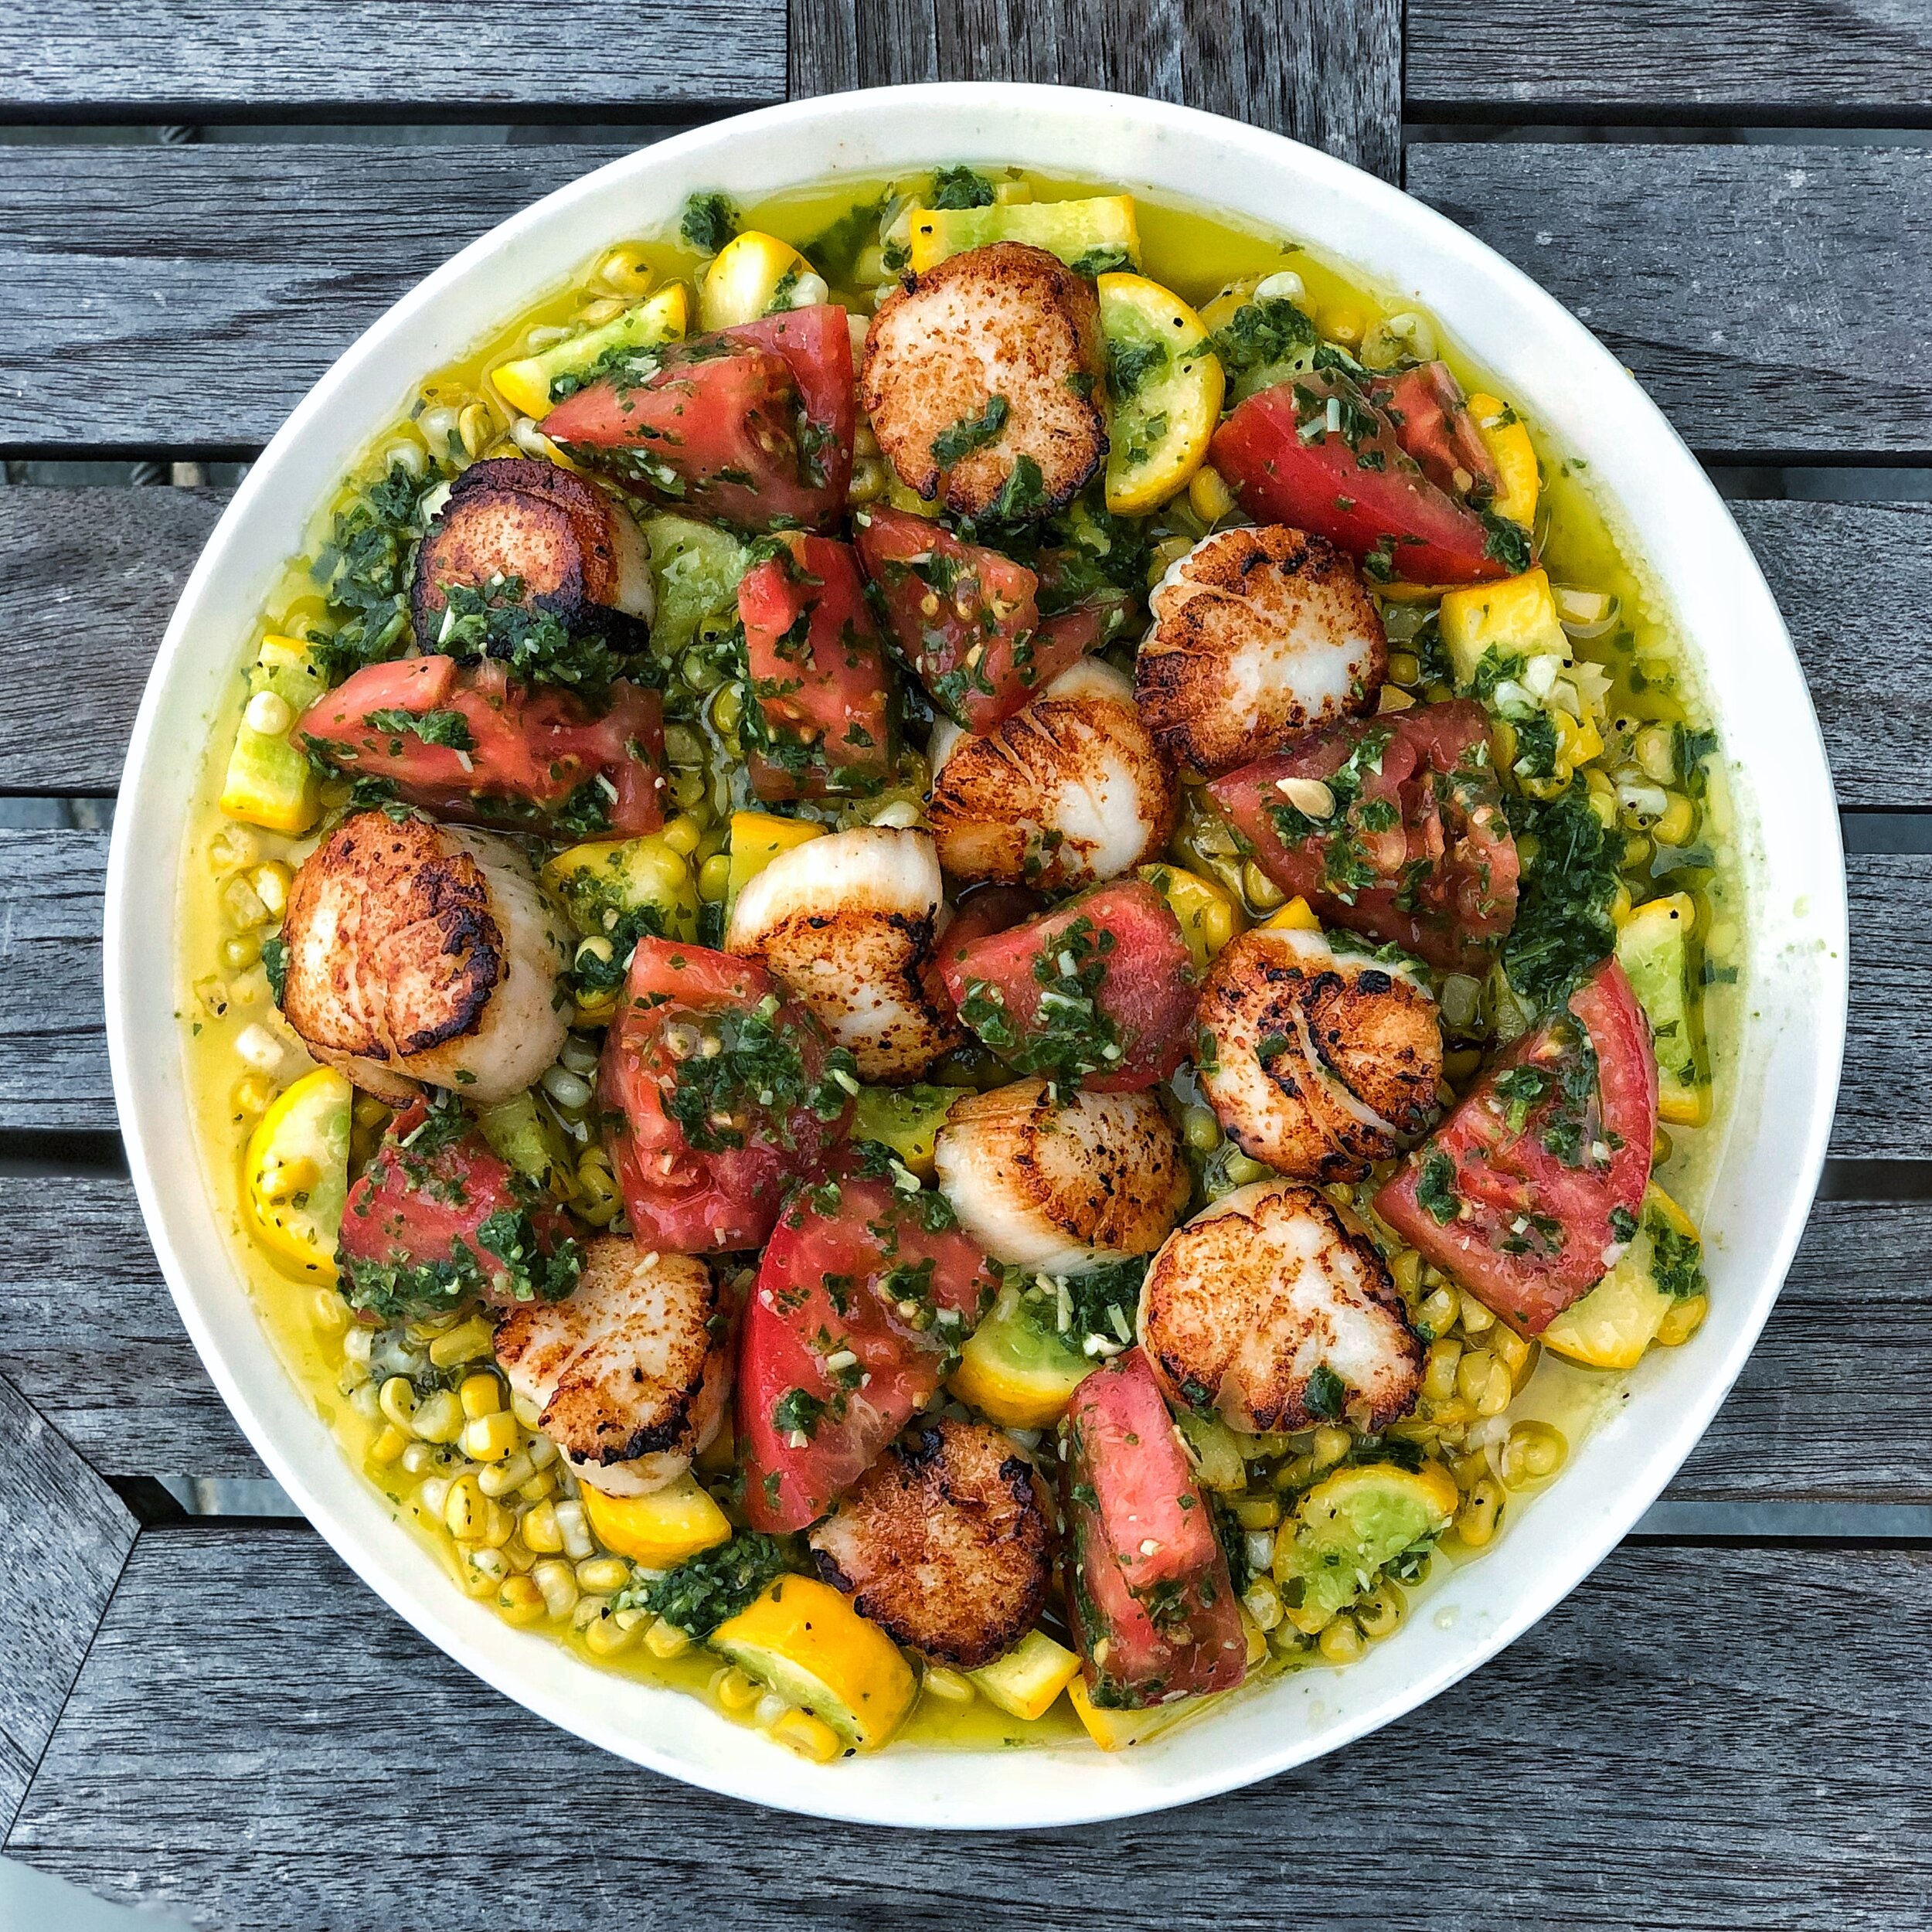 Seared Diver Scallops over a summer corn saute with heirloom tomatoes and lemon basil pesto